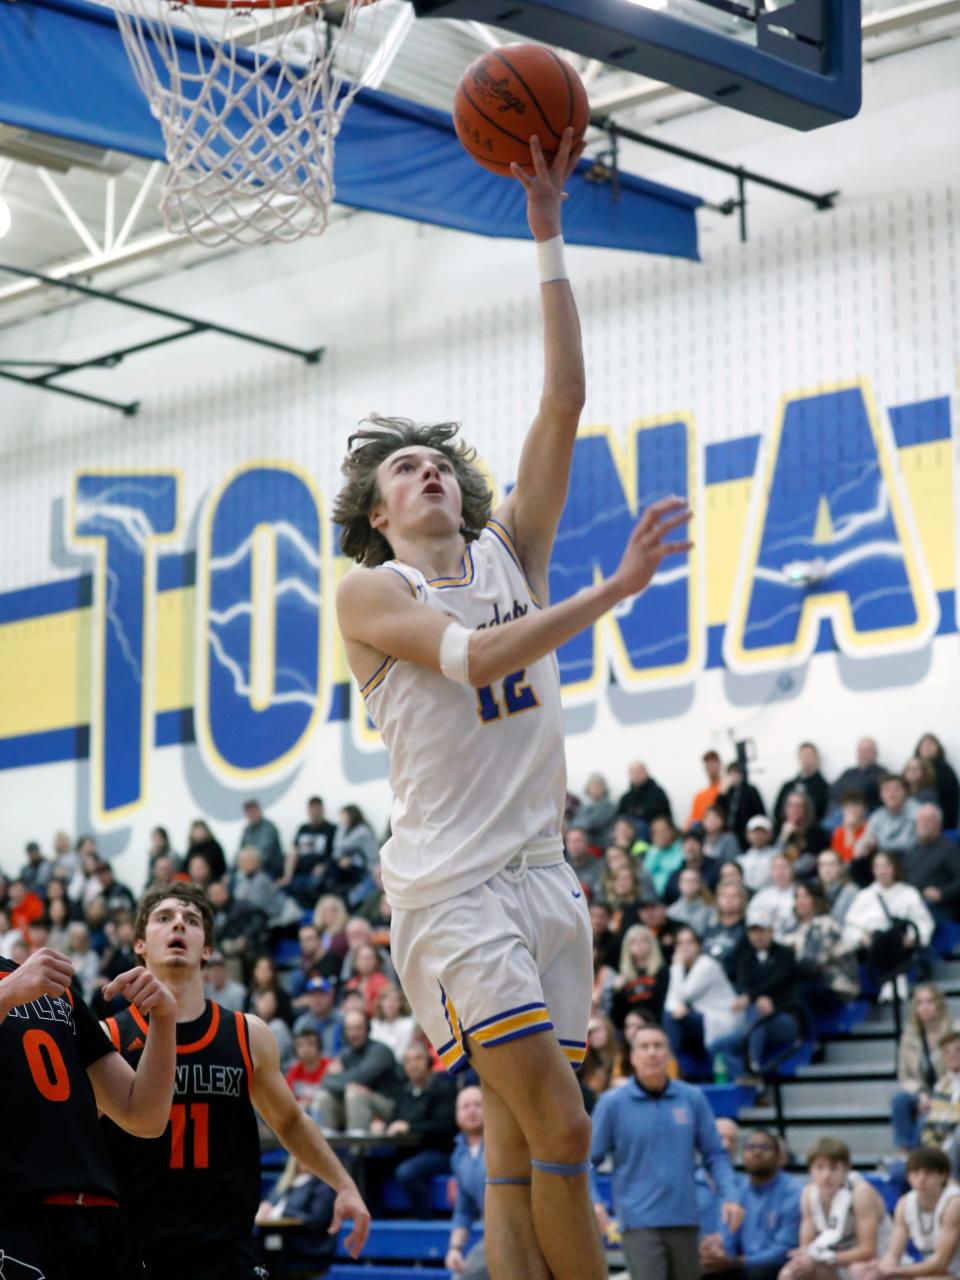 Jake Anton goes in for a layup during West Muskingum's 44-36 win against visiting New Lexington on Friday night at Gary Ankrum Gymnasium in Falls Township. The win secured the outright Muskingum Valley League-Small School division title for West, its first league title since 1991.